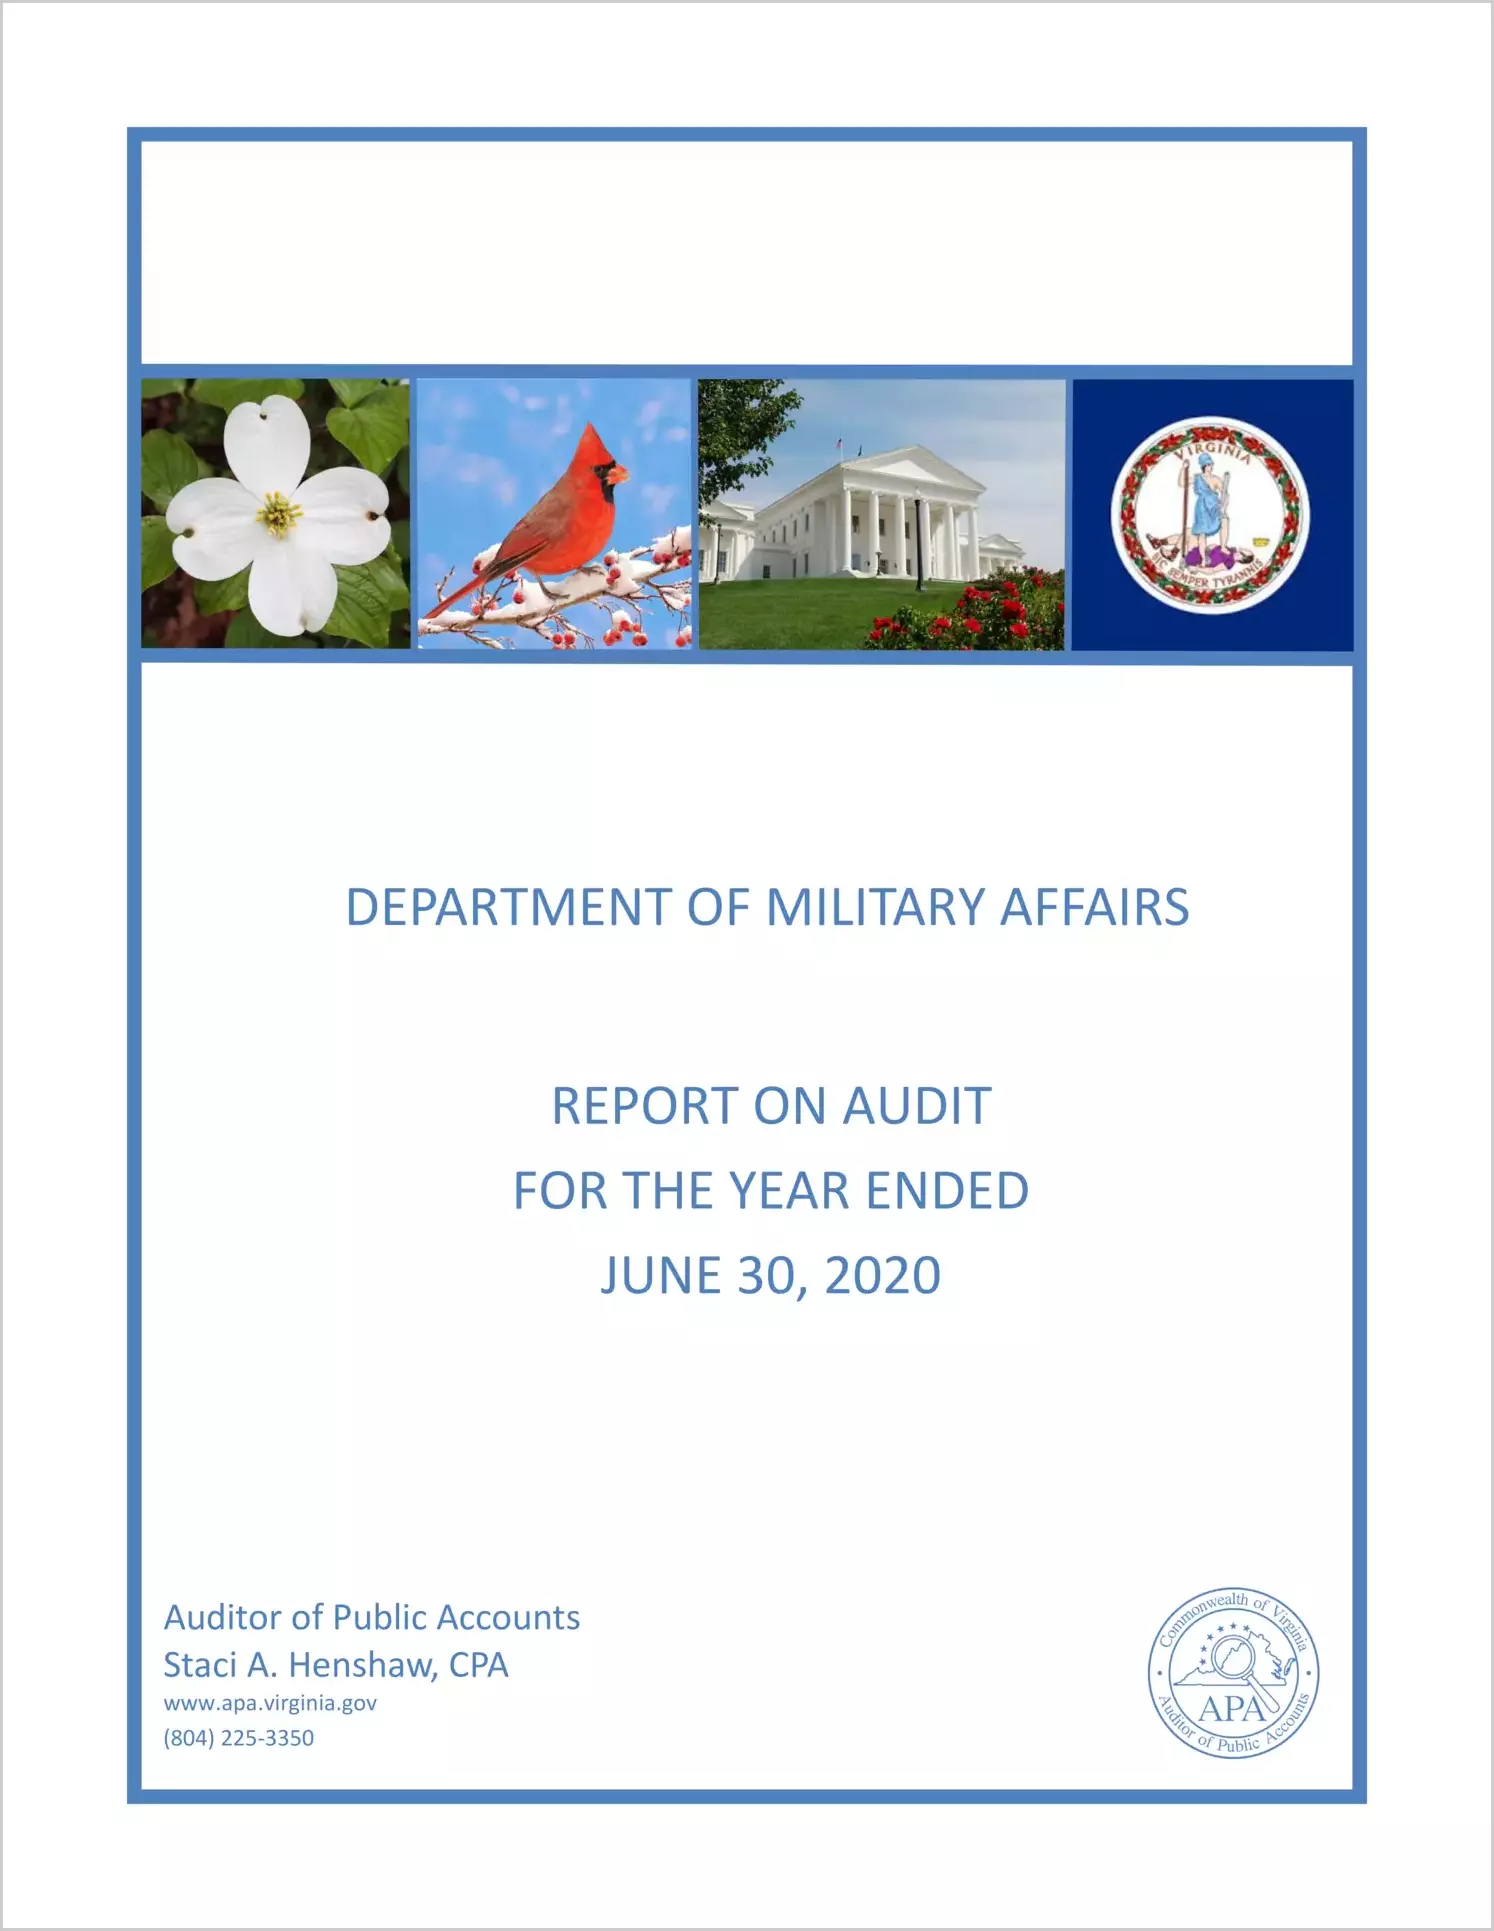 Department of Military Affairs for the year ended June 30, 2020